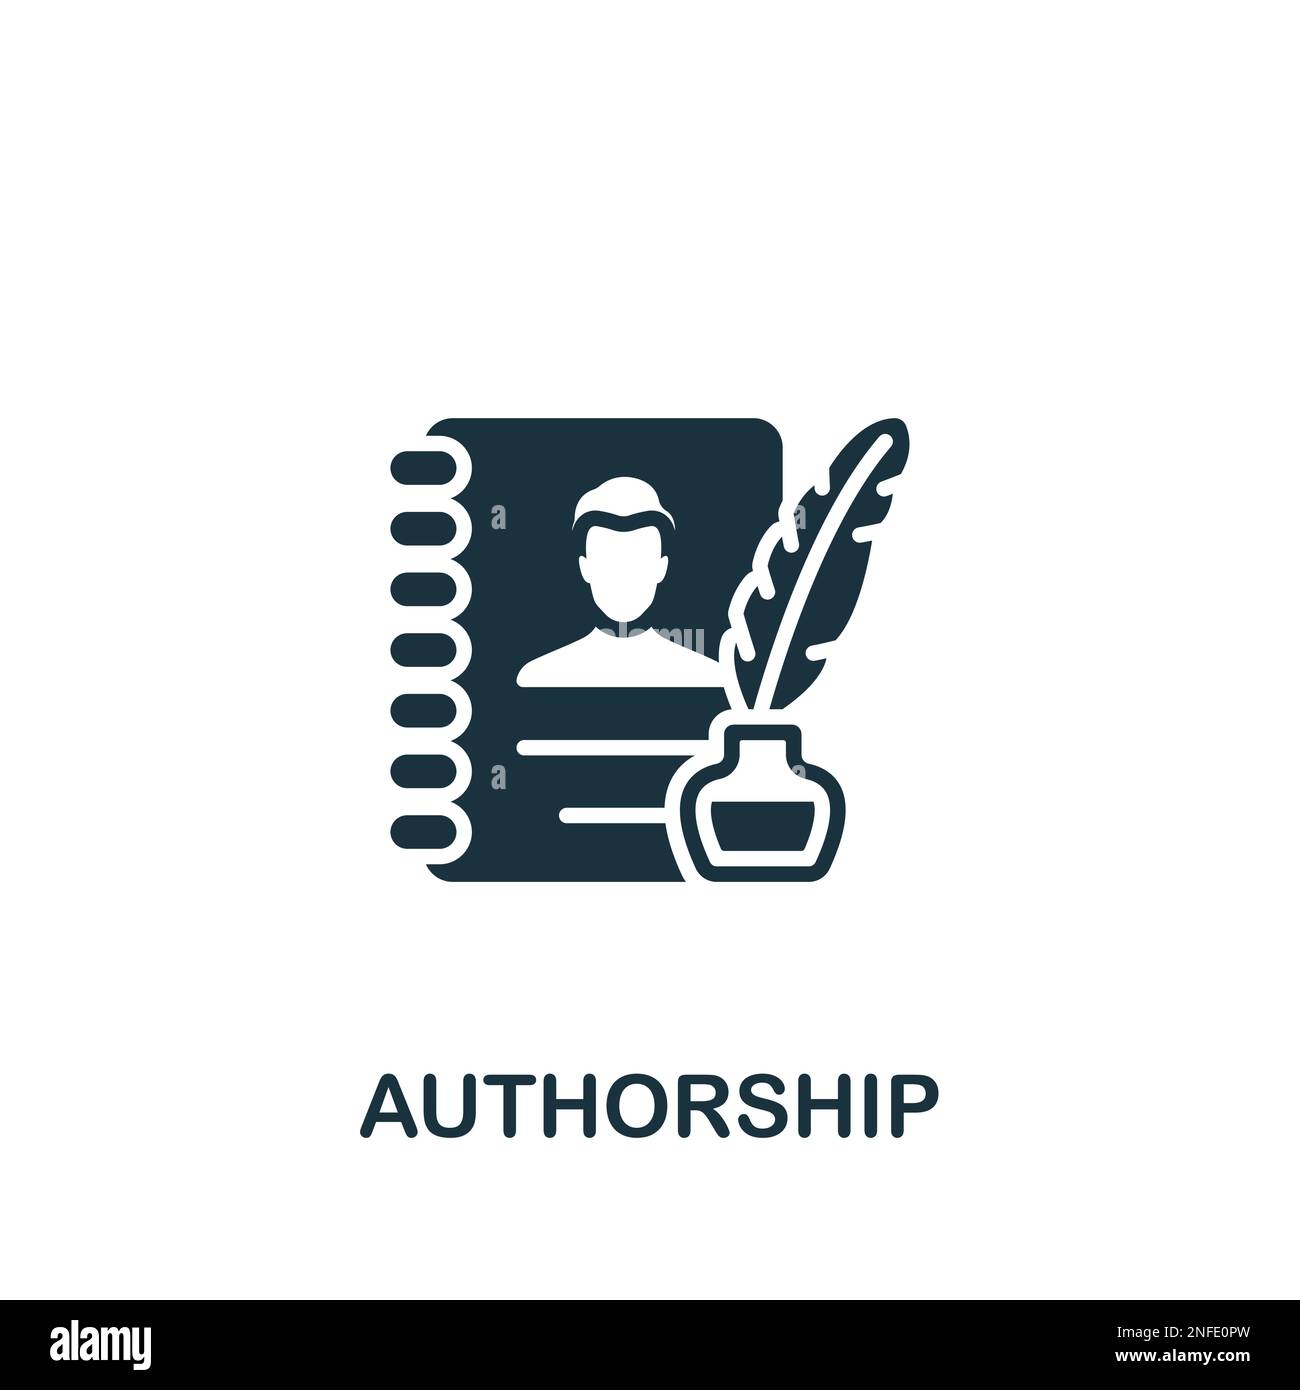 Authorship icon. Monochrome simple sign from intellectual property collection. Authorship icon for logo, templates, web design and infographics. Stock Vector